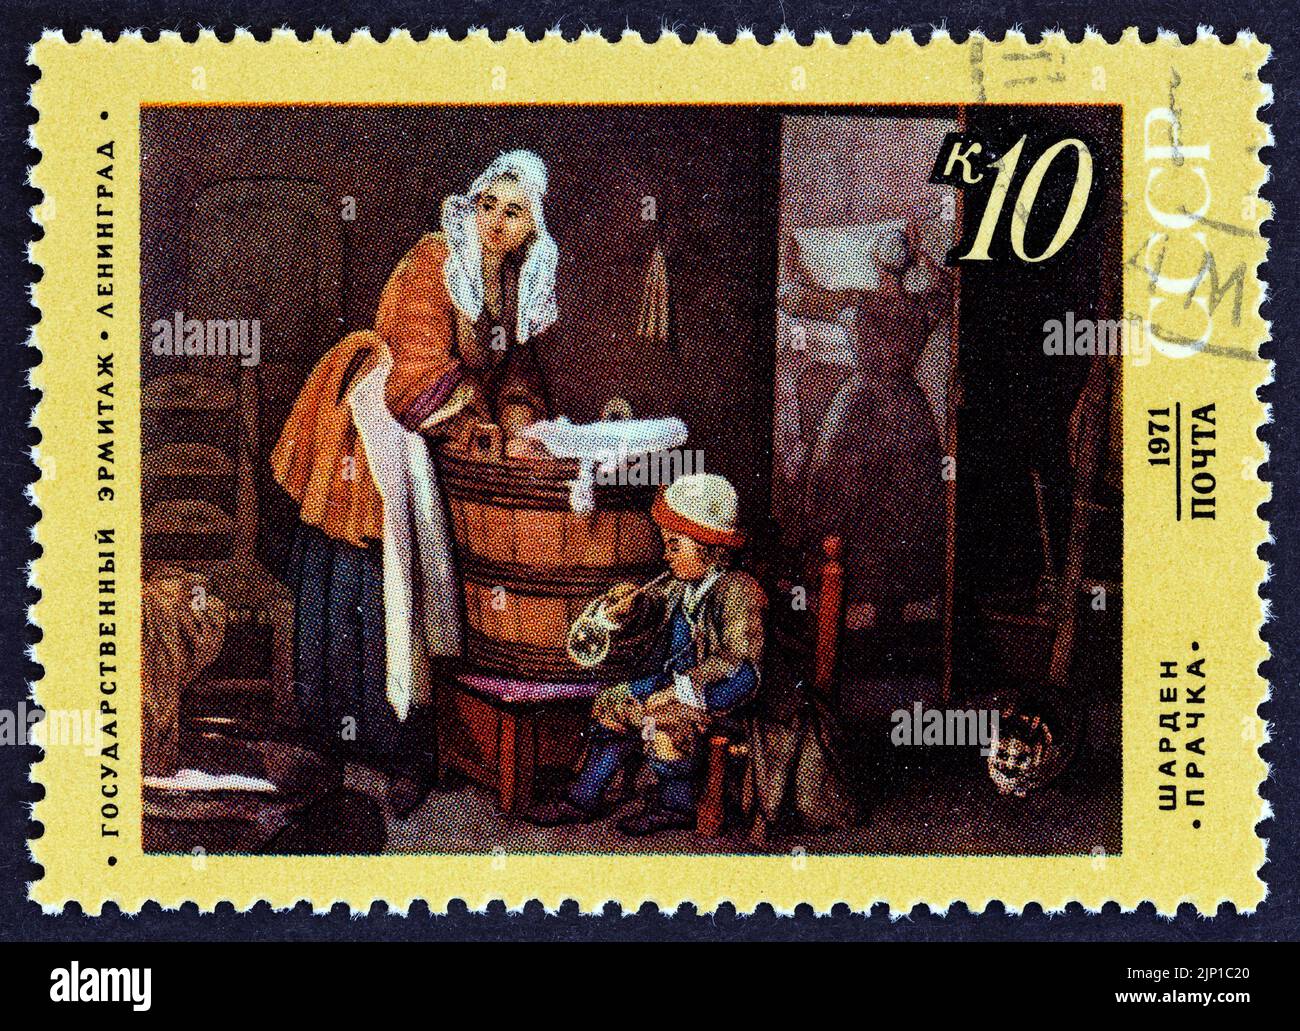 USSR - CIRCA 1971: A stamp printed in USSR from the 'Foreign Paintings in Russian Museums' issue shows The Washerwoman by Chardin, 1737. Stock Photo